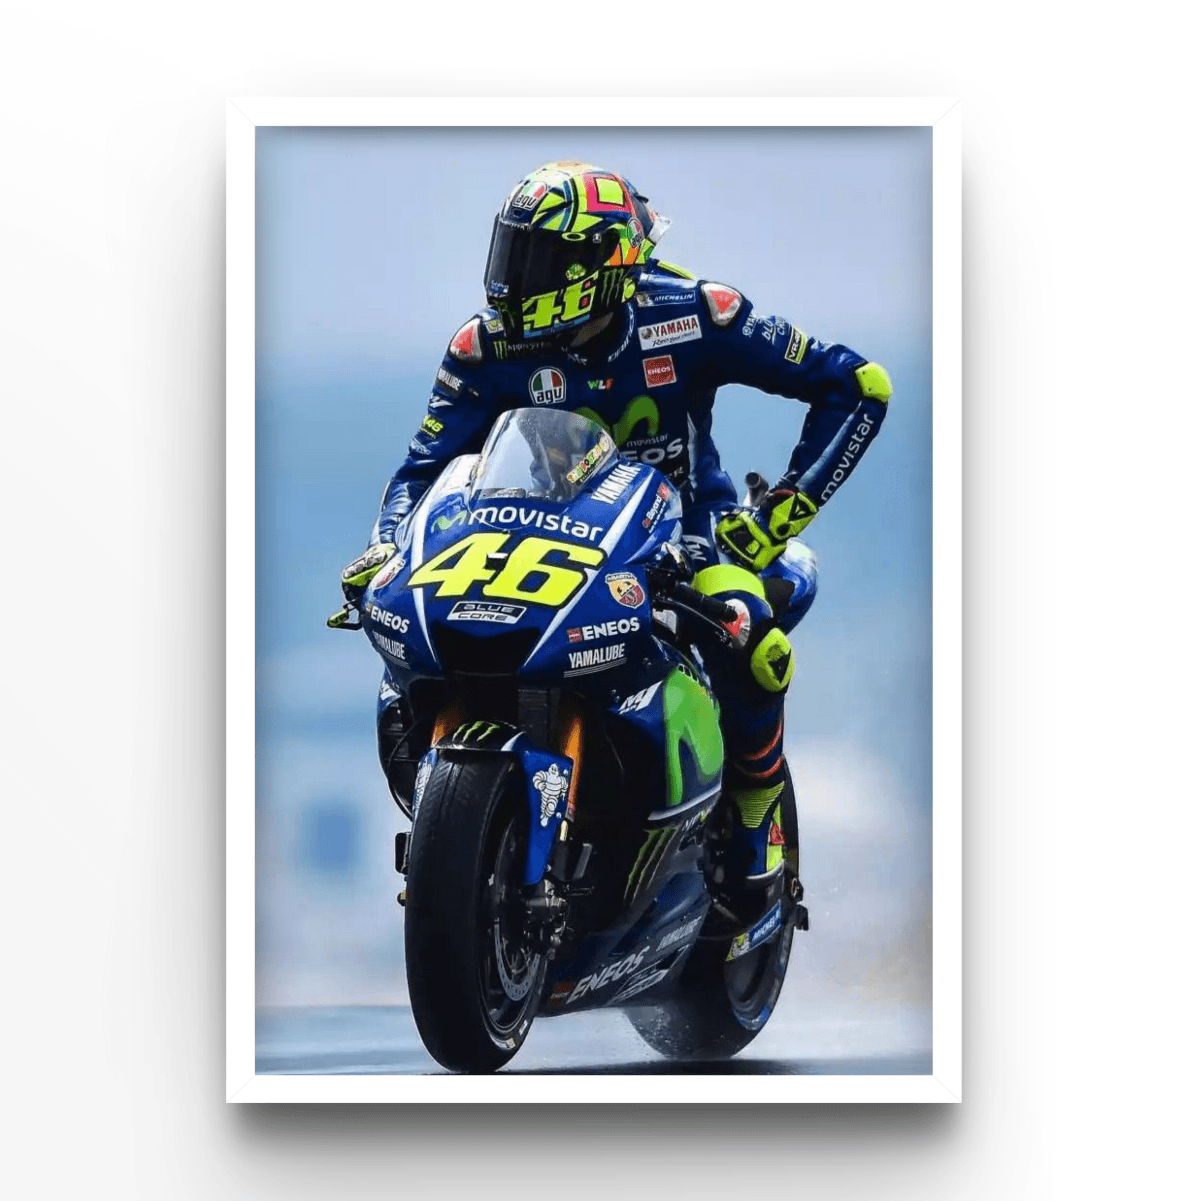 Valentino Rossi 3 - A4, A3, A2 Posters Base - Poster Print Shop / Art Prints / PostersBase